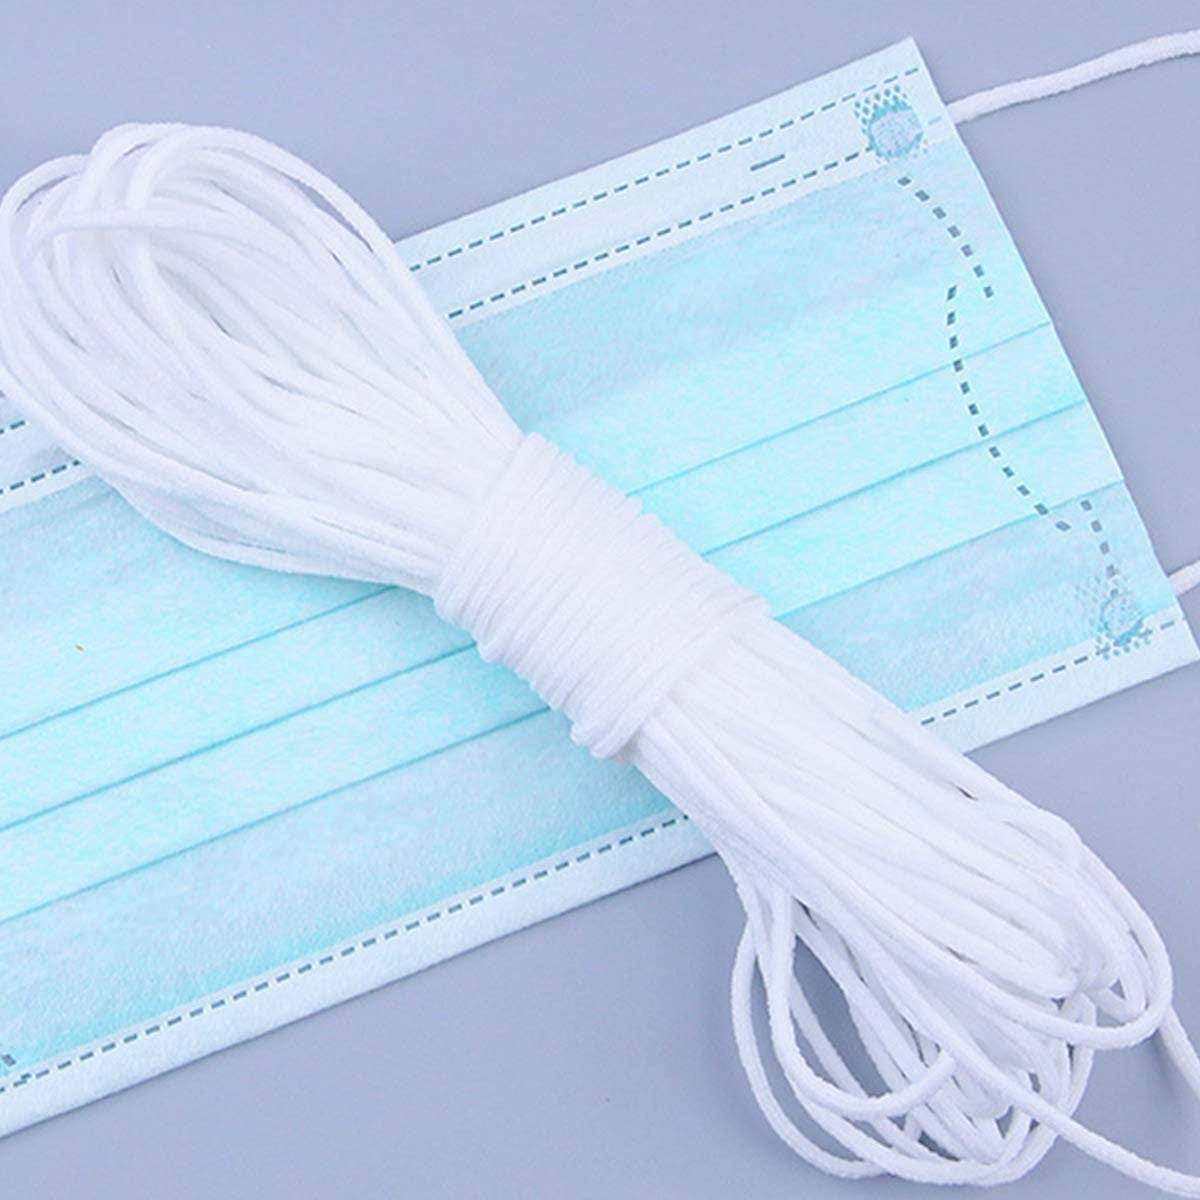 3 Yards ROUND ELASTIC CORD 1/8" 3 mm doll stringing & sewing US SELLER 